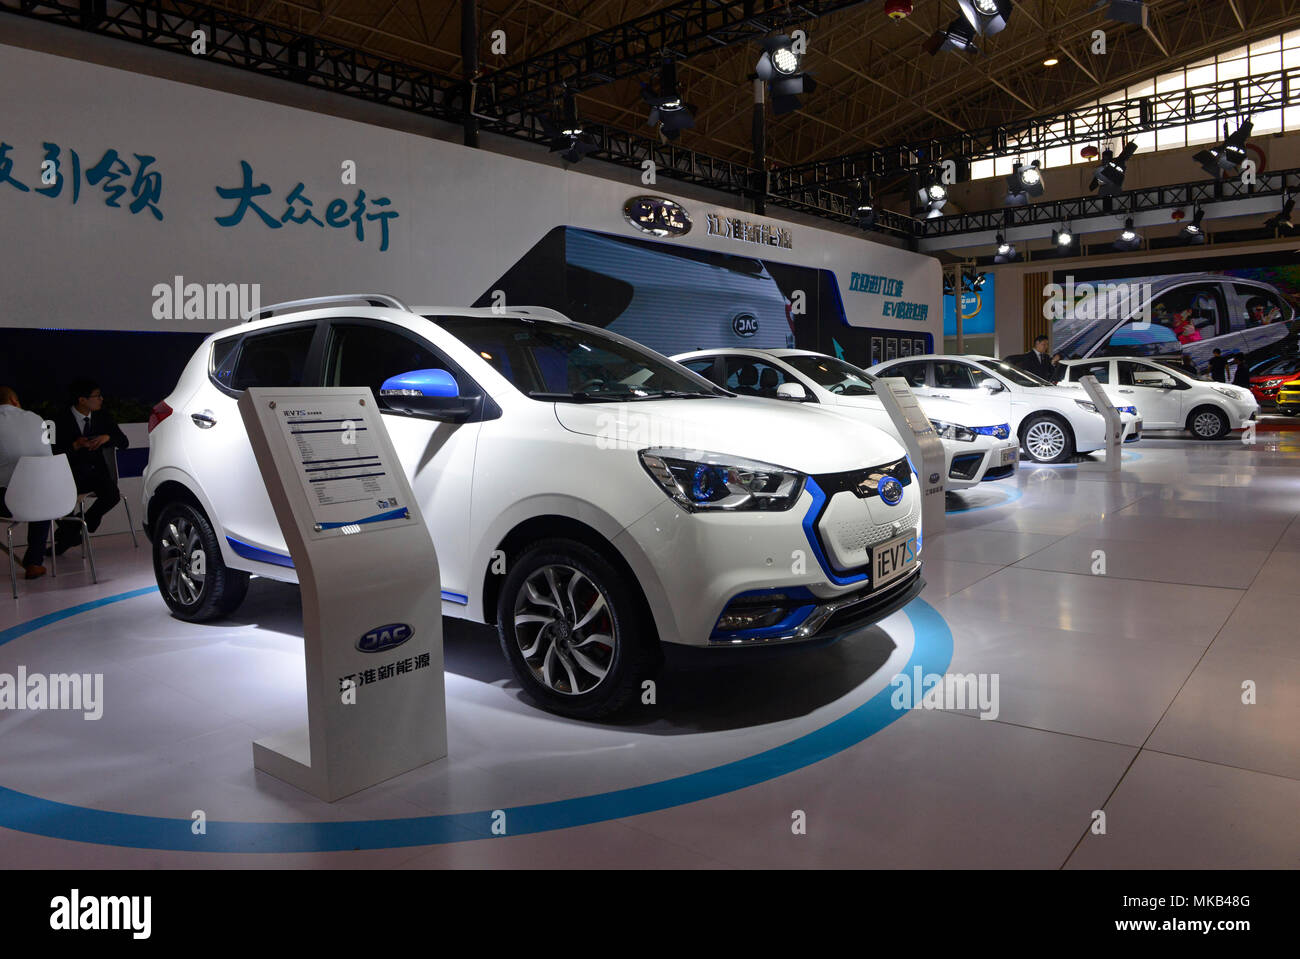 A range of JAC electric vehicles on display at the at the Auto China